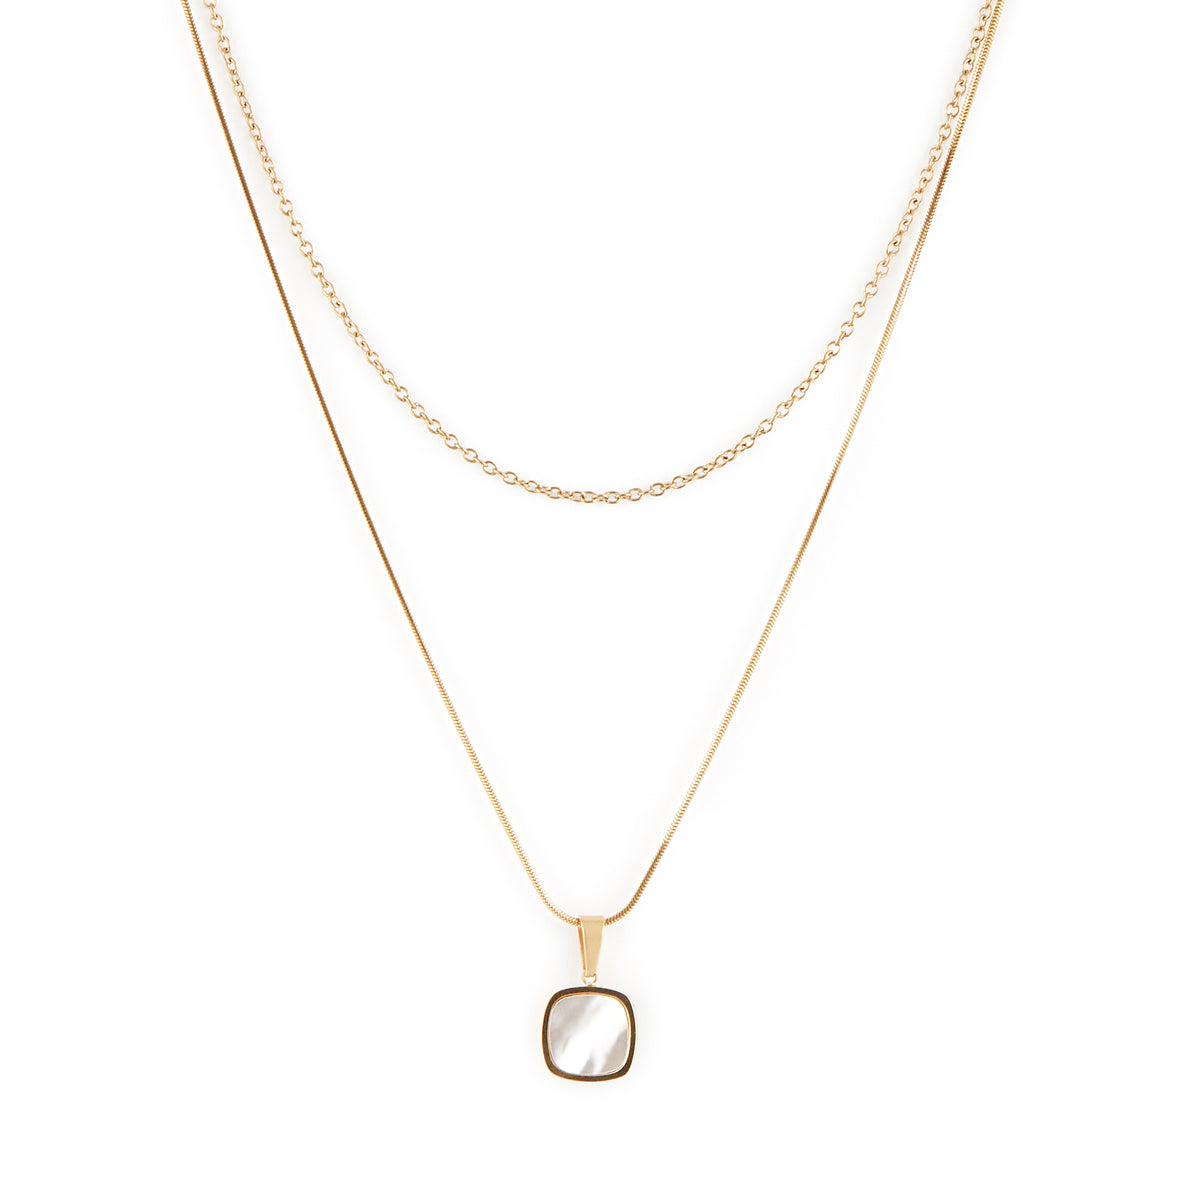 Mirage Necklace - Gold